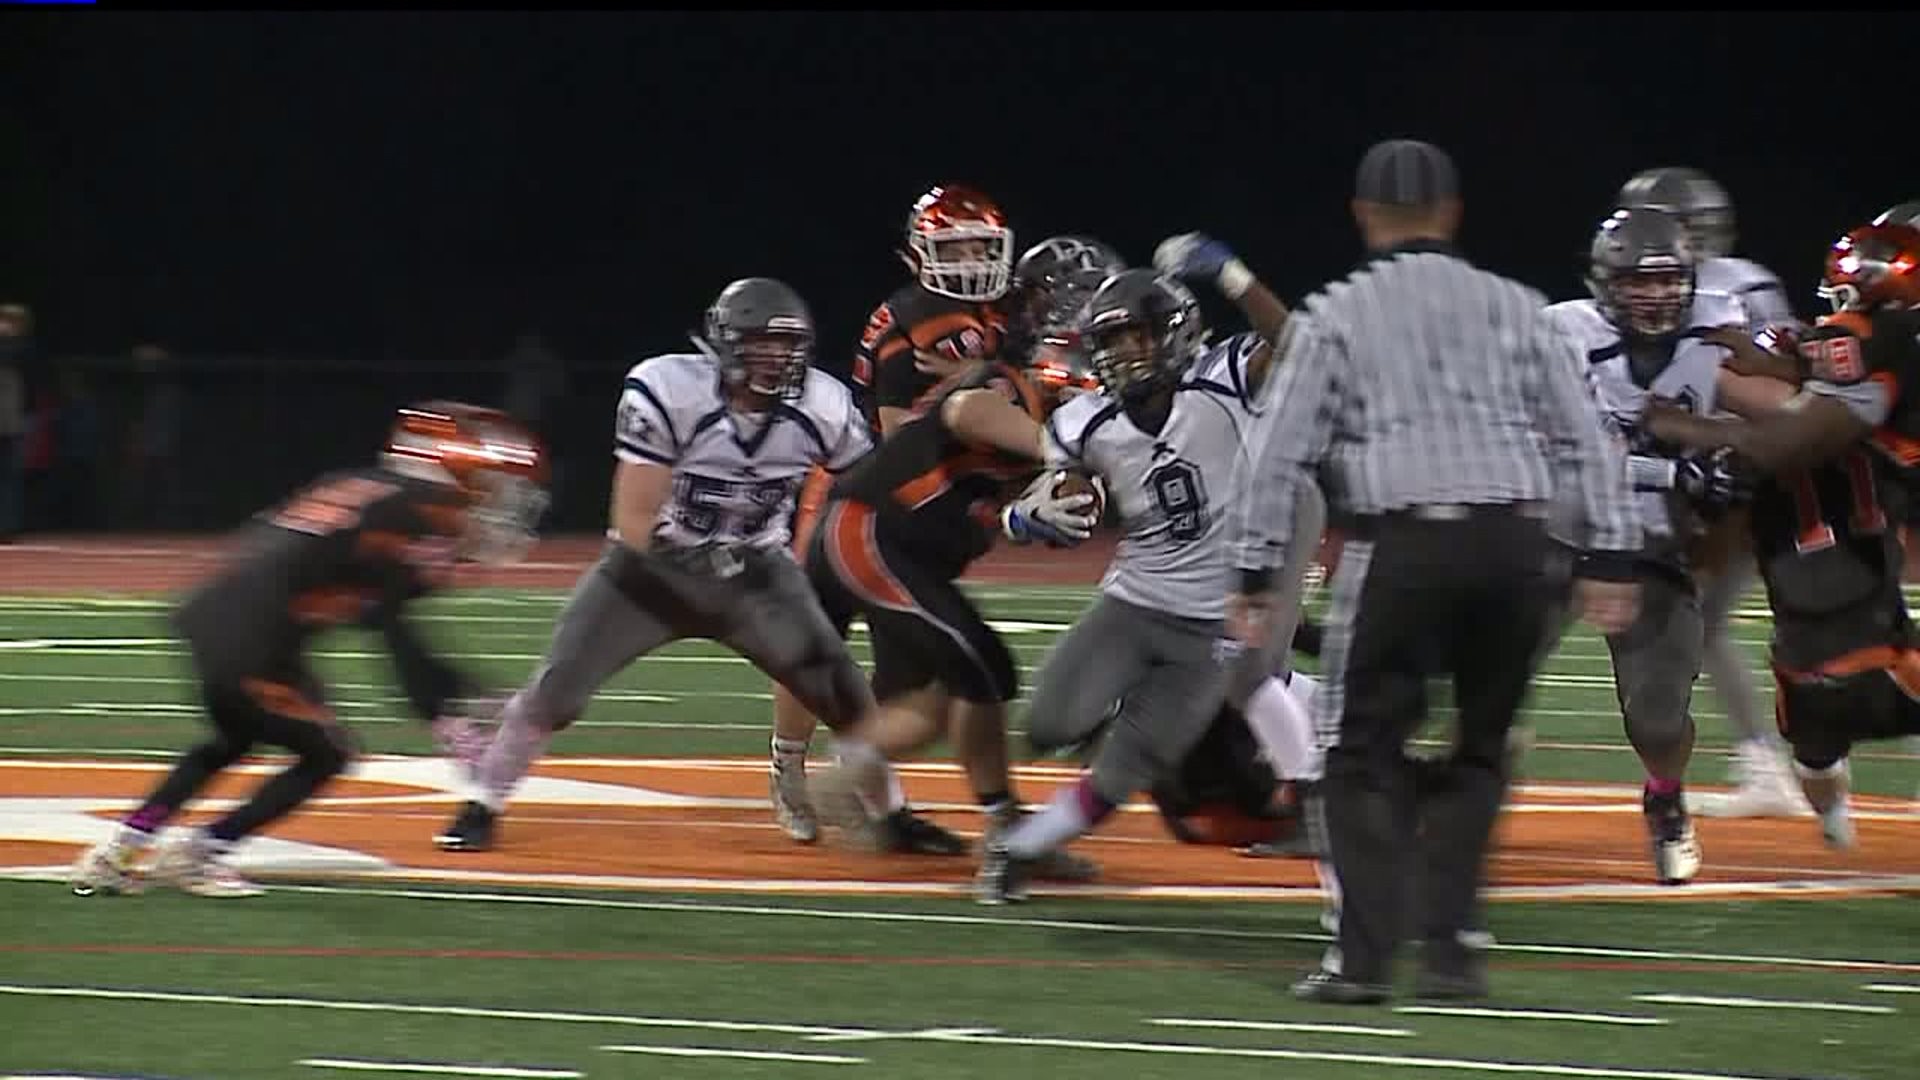 HSFF week 9 Dallastown at Central York highlights